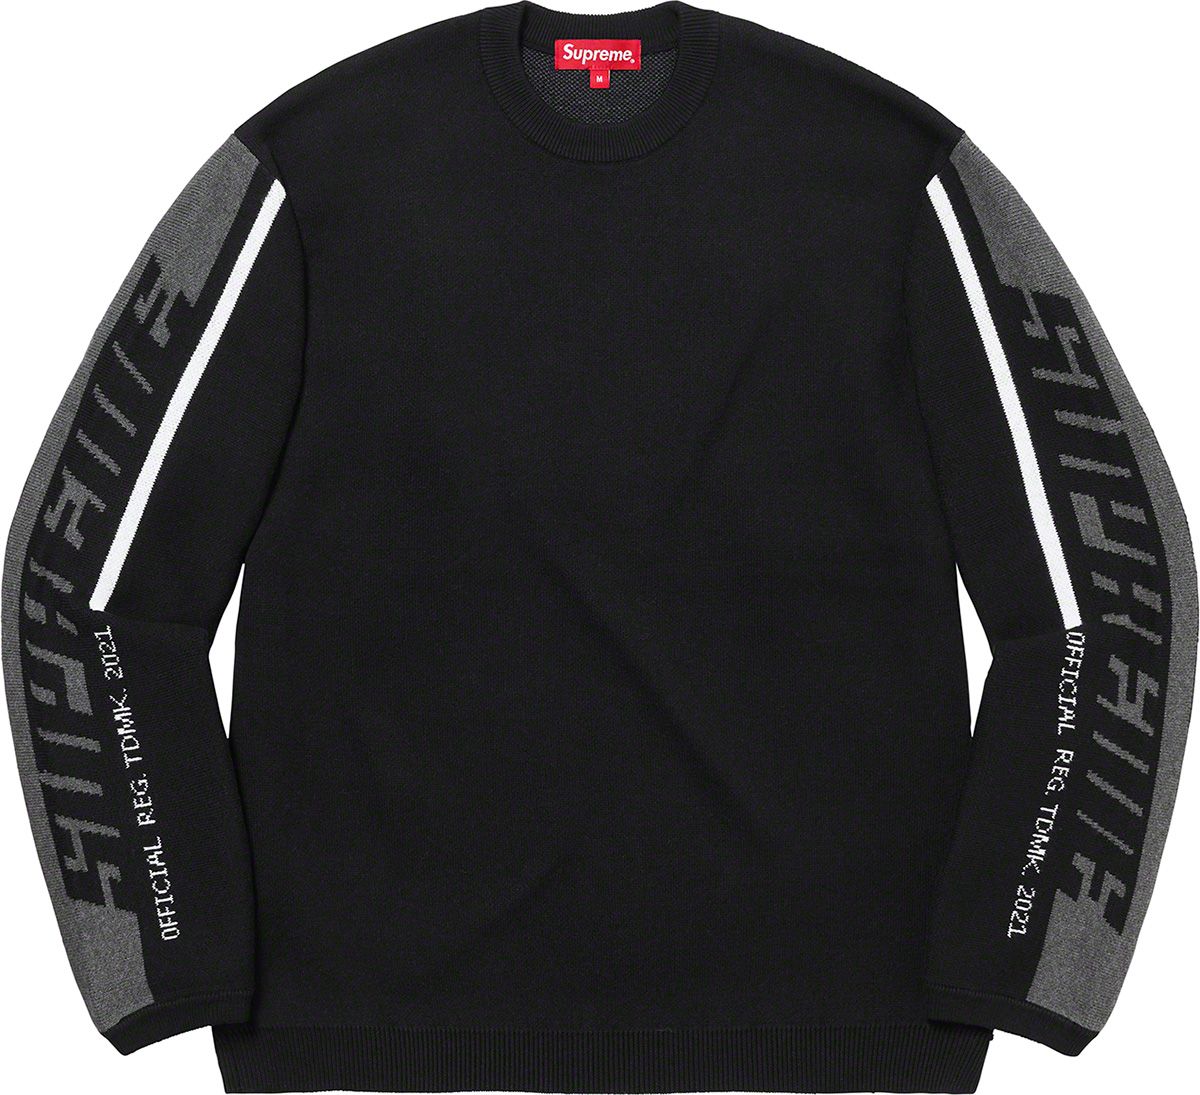 Mélange Rib Knit Sweater - Fall/Winter 2021 Preview – Supreme